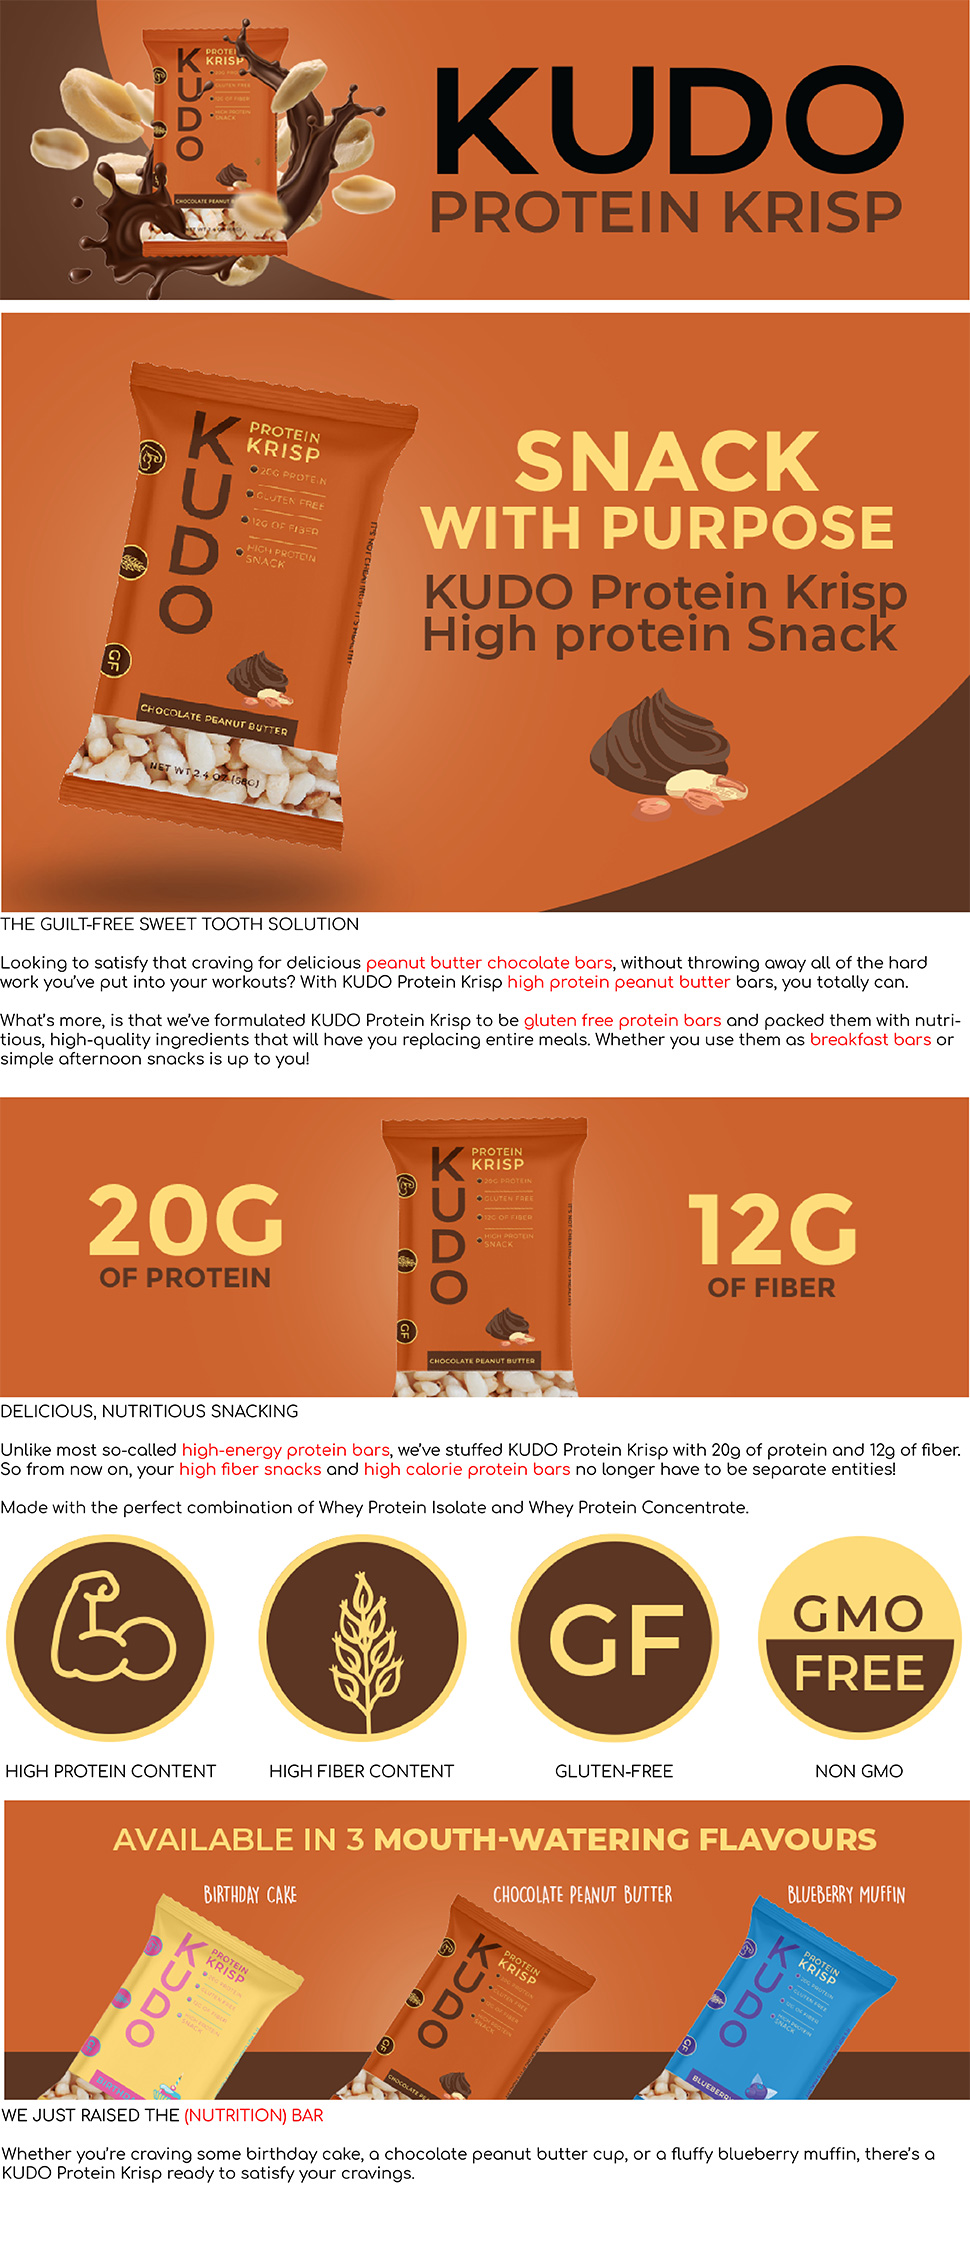 KUDO Protein Krisp Chocoalte Peanut Butter A+ Content Preview